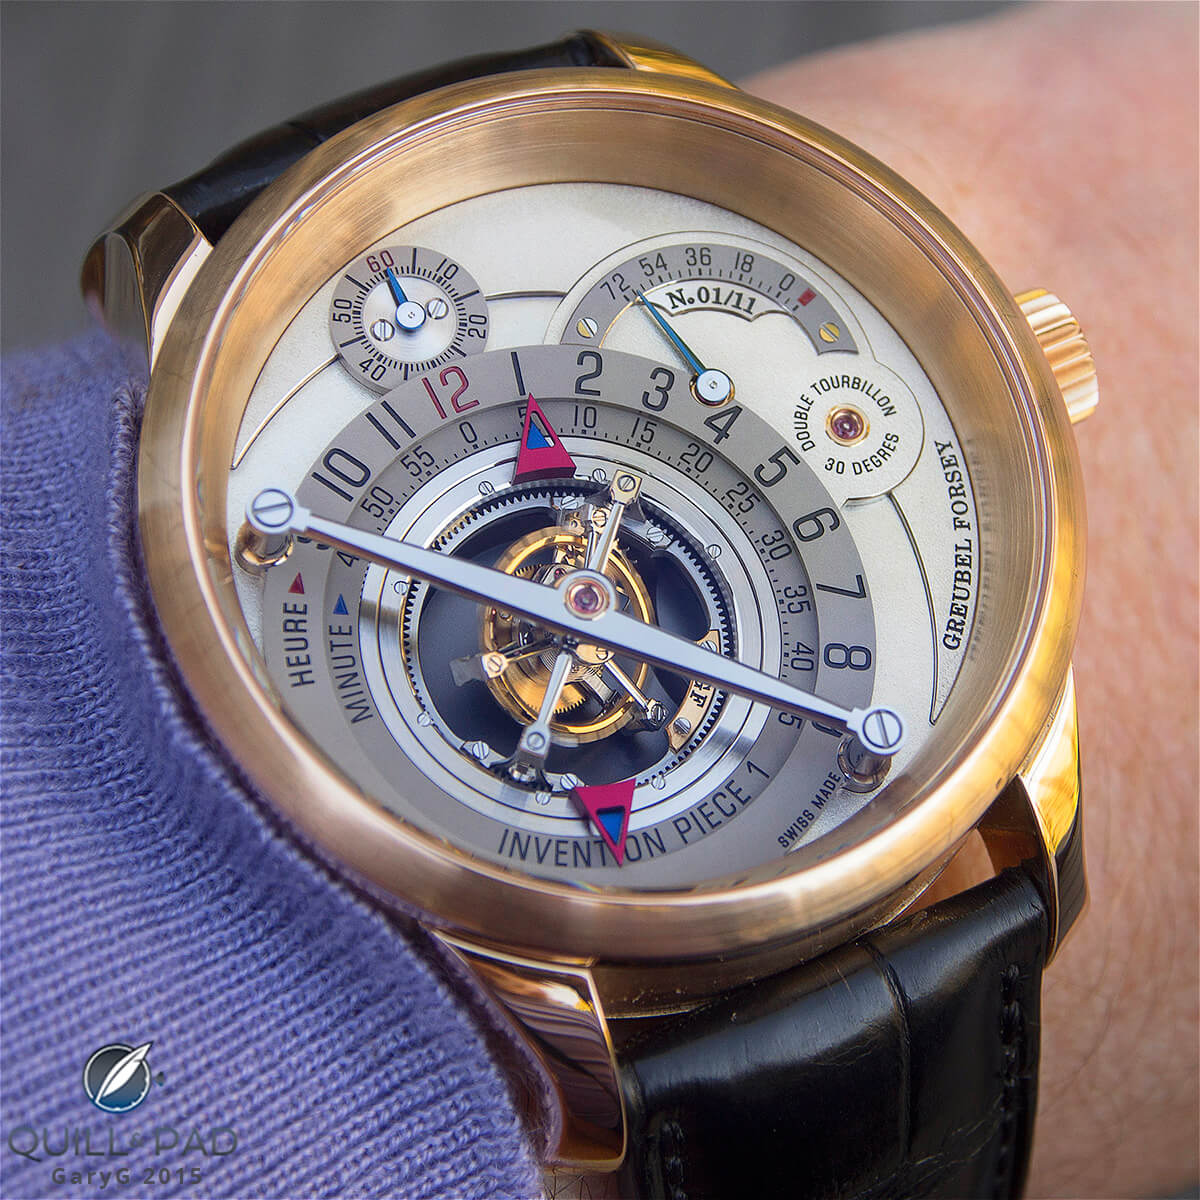 Worth the sacrifice: Greubel Forsey Invention Piece 1